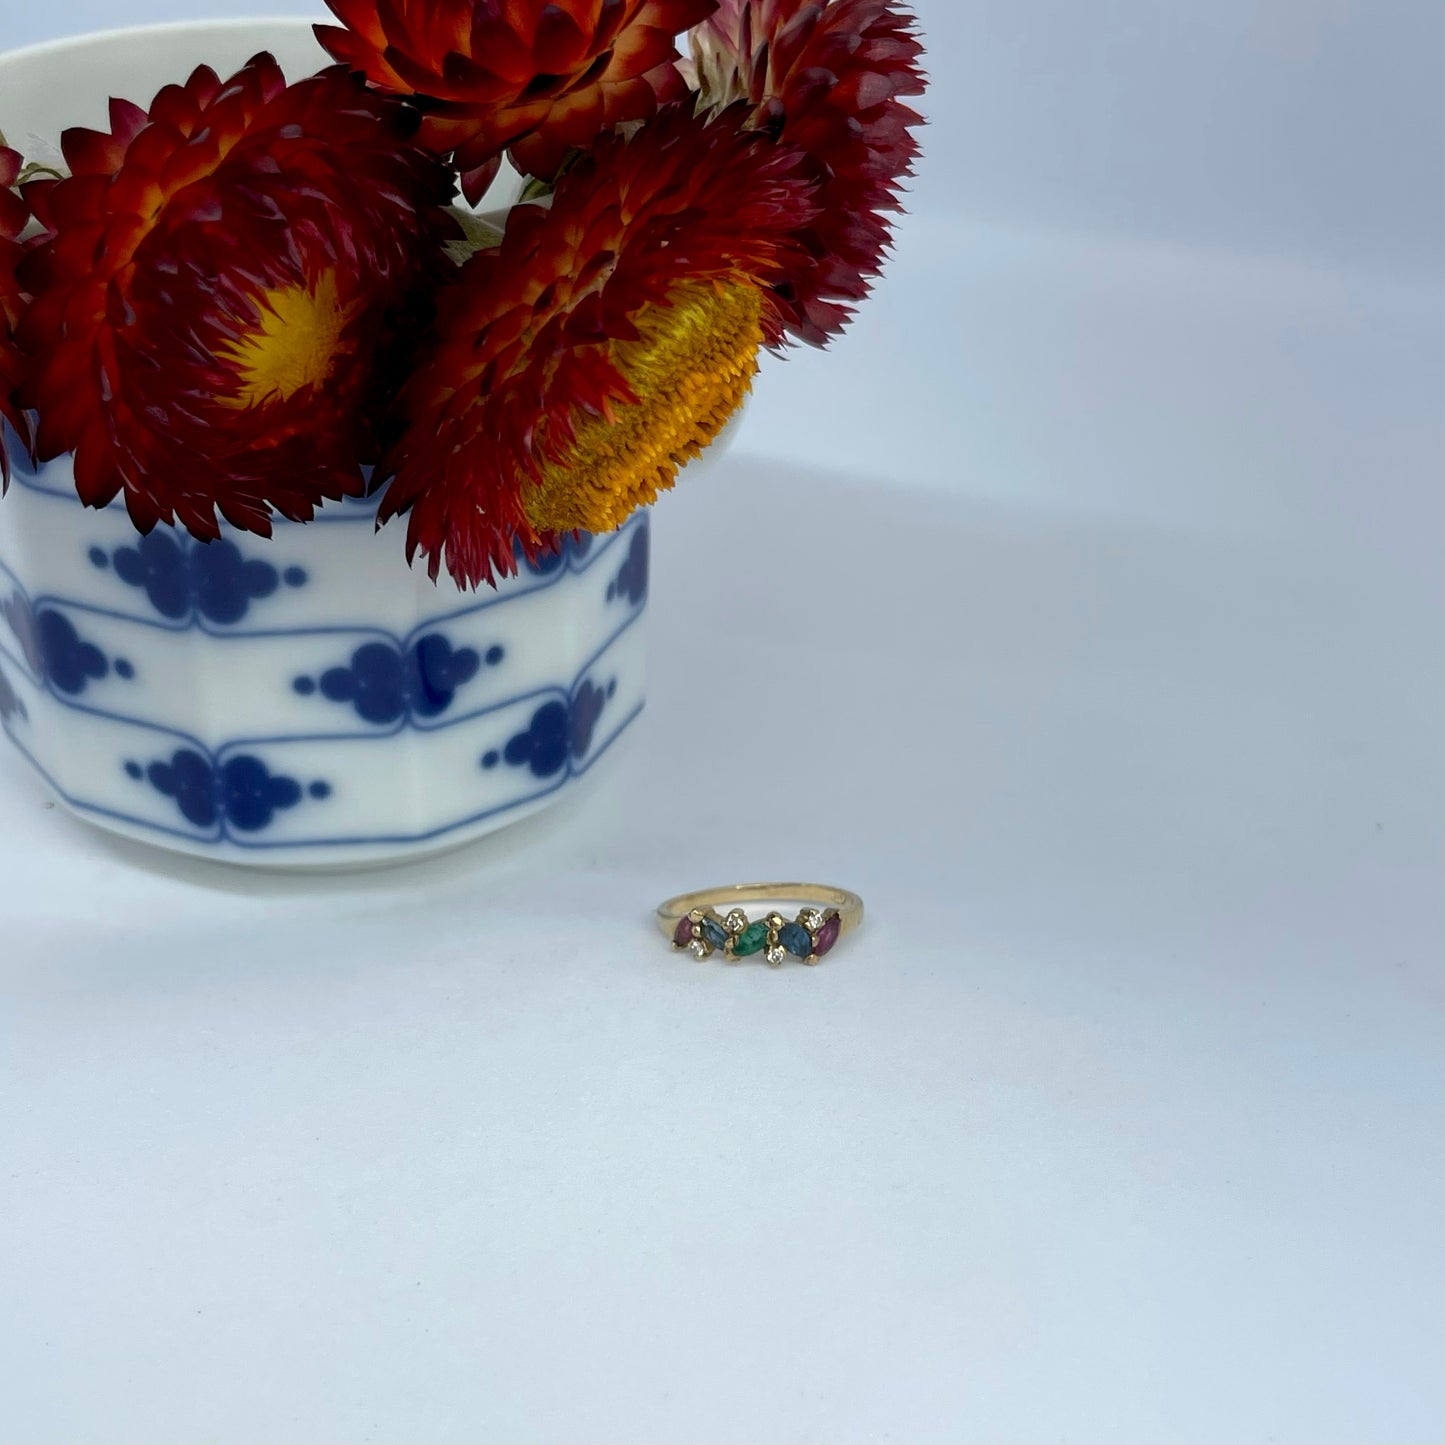 9ct gold ring with rubies, sapphires, emeralds + diamonds